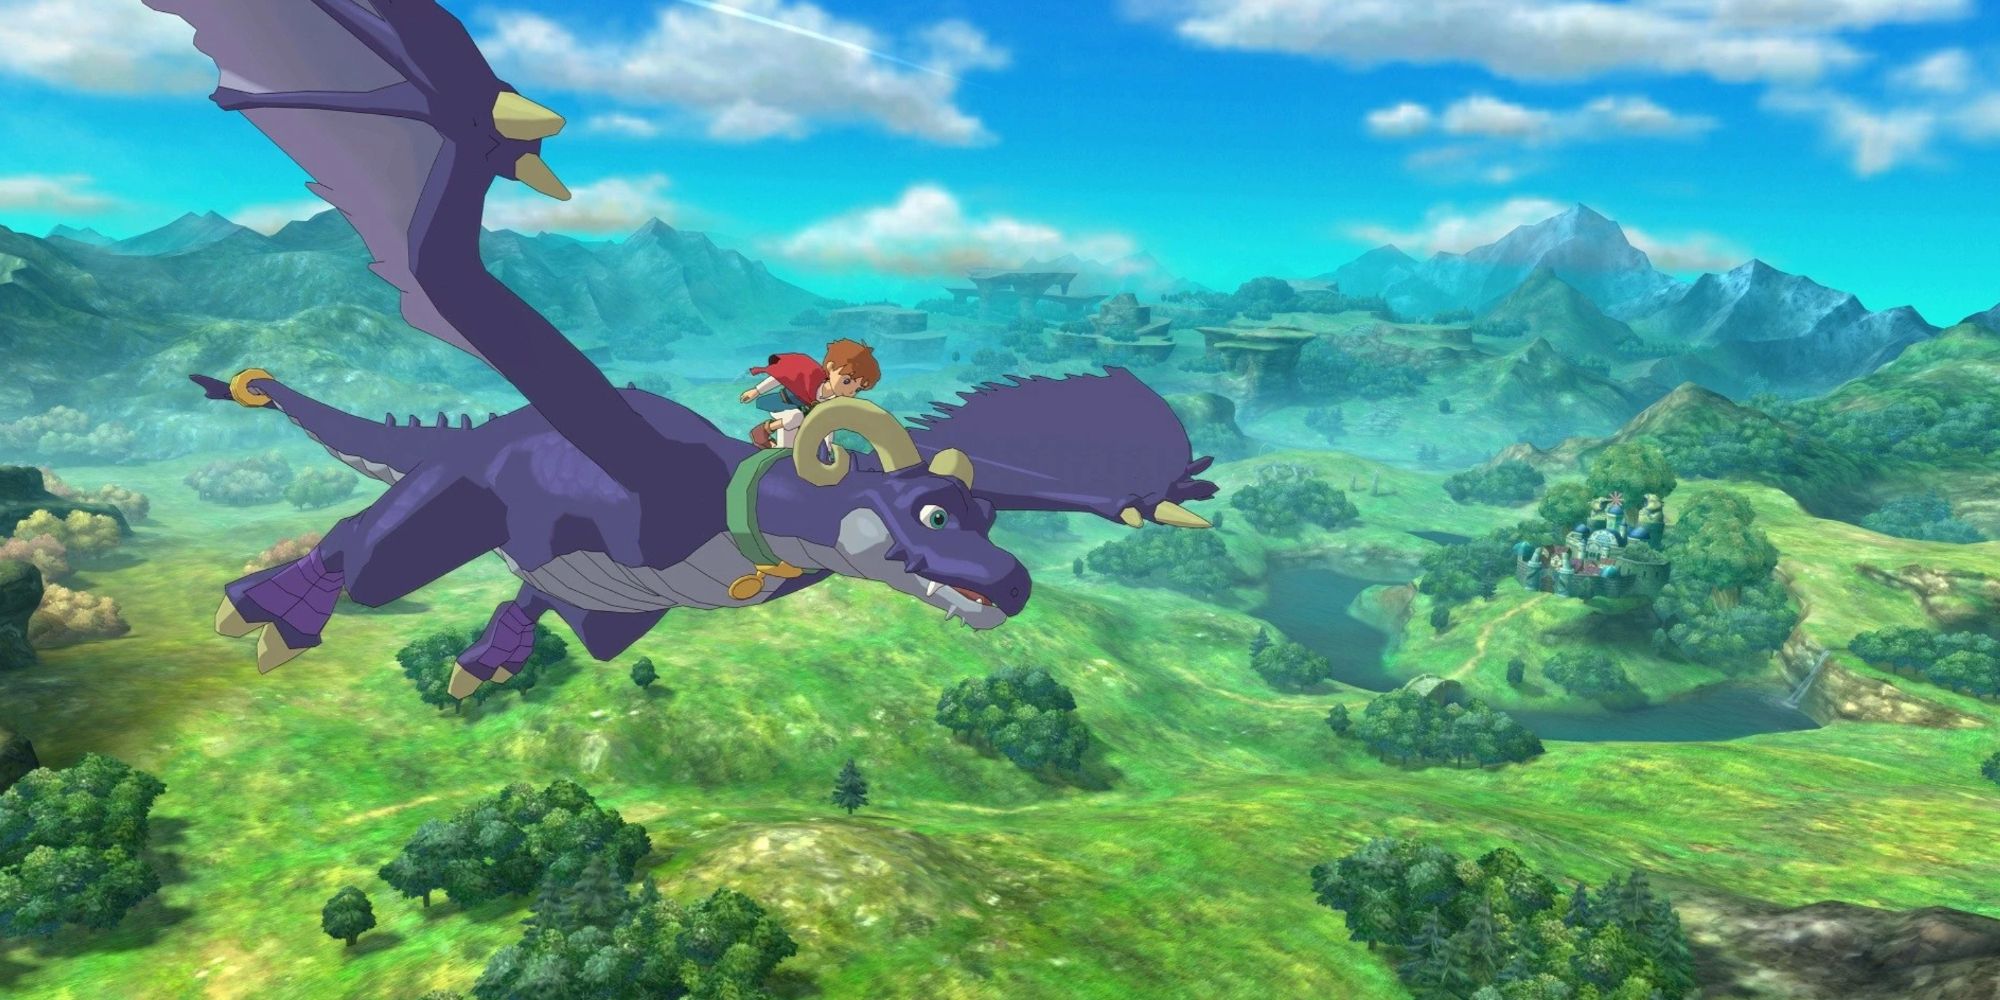 Oliver riding on the back of a dragon creature in Ni No Kuni Wrath of the White Witch